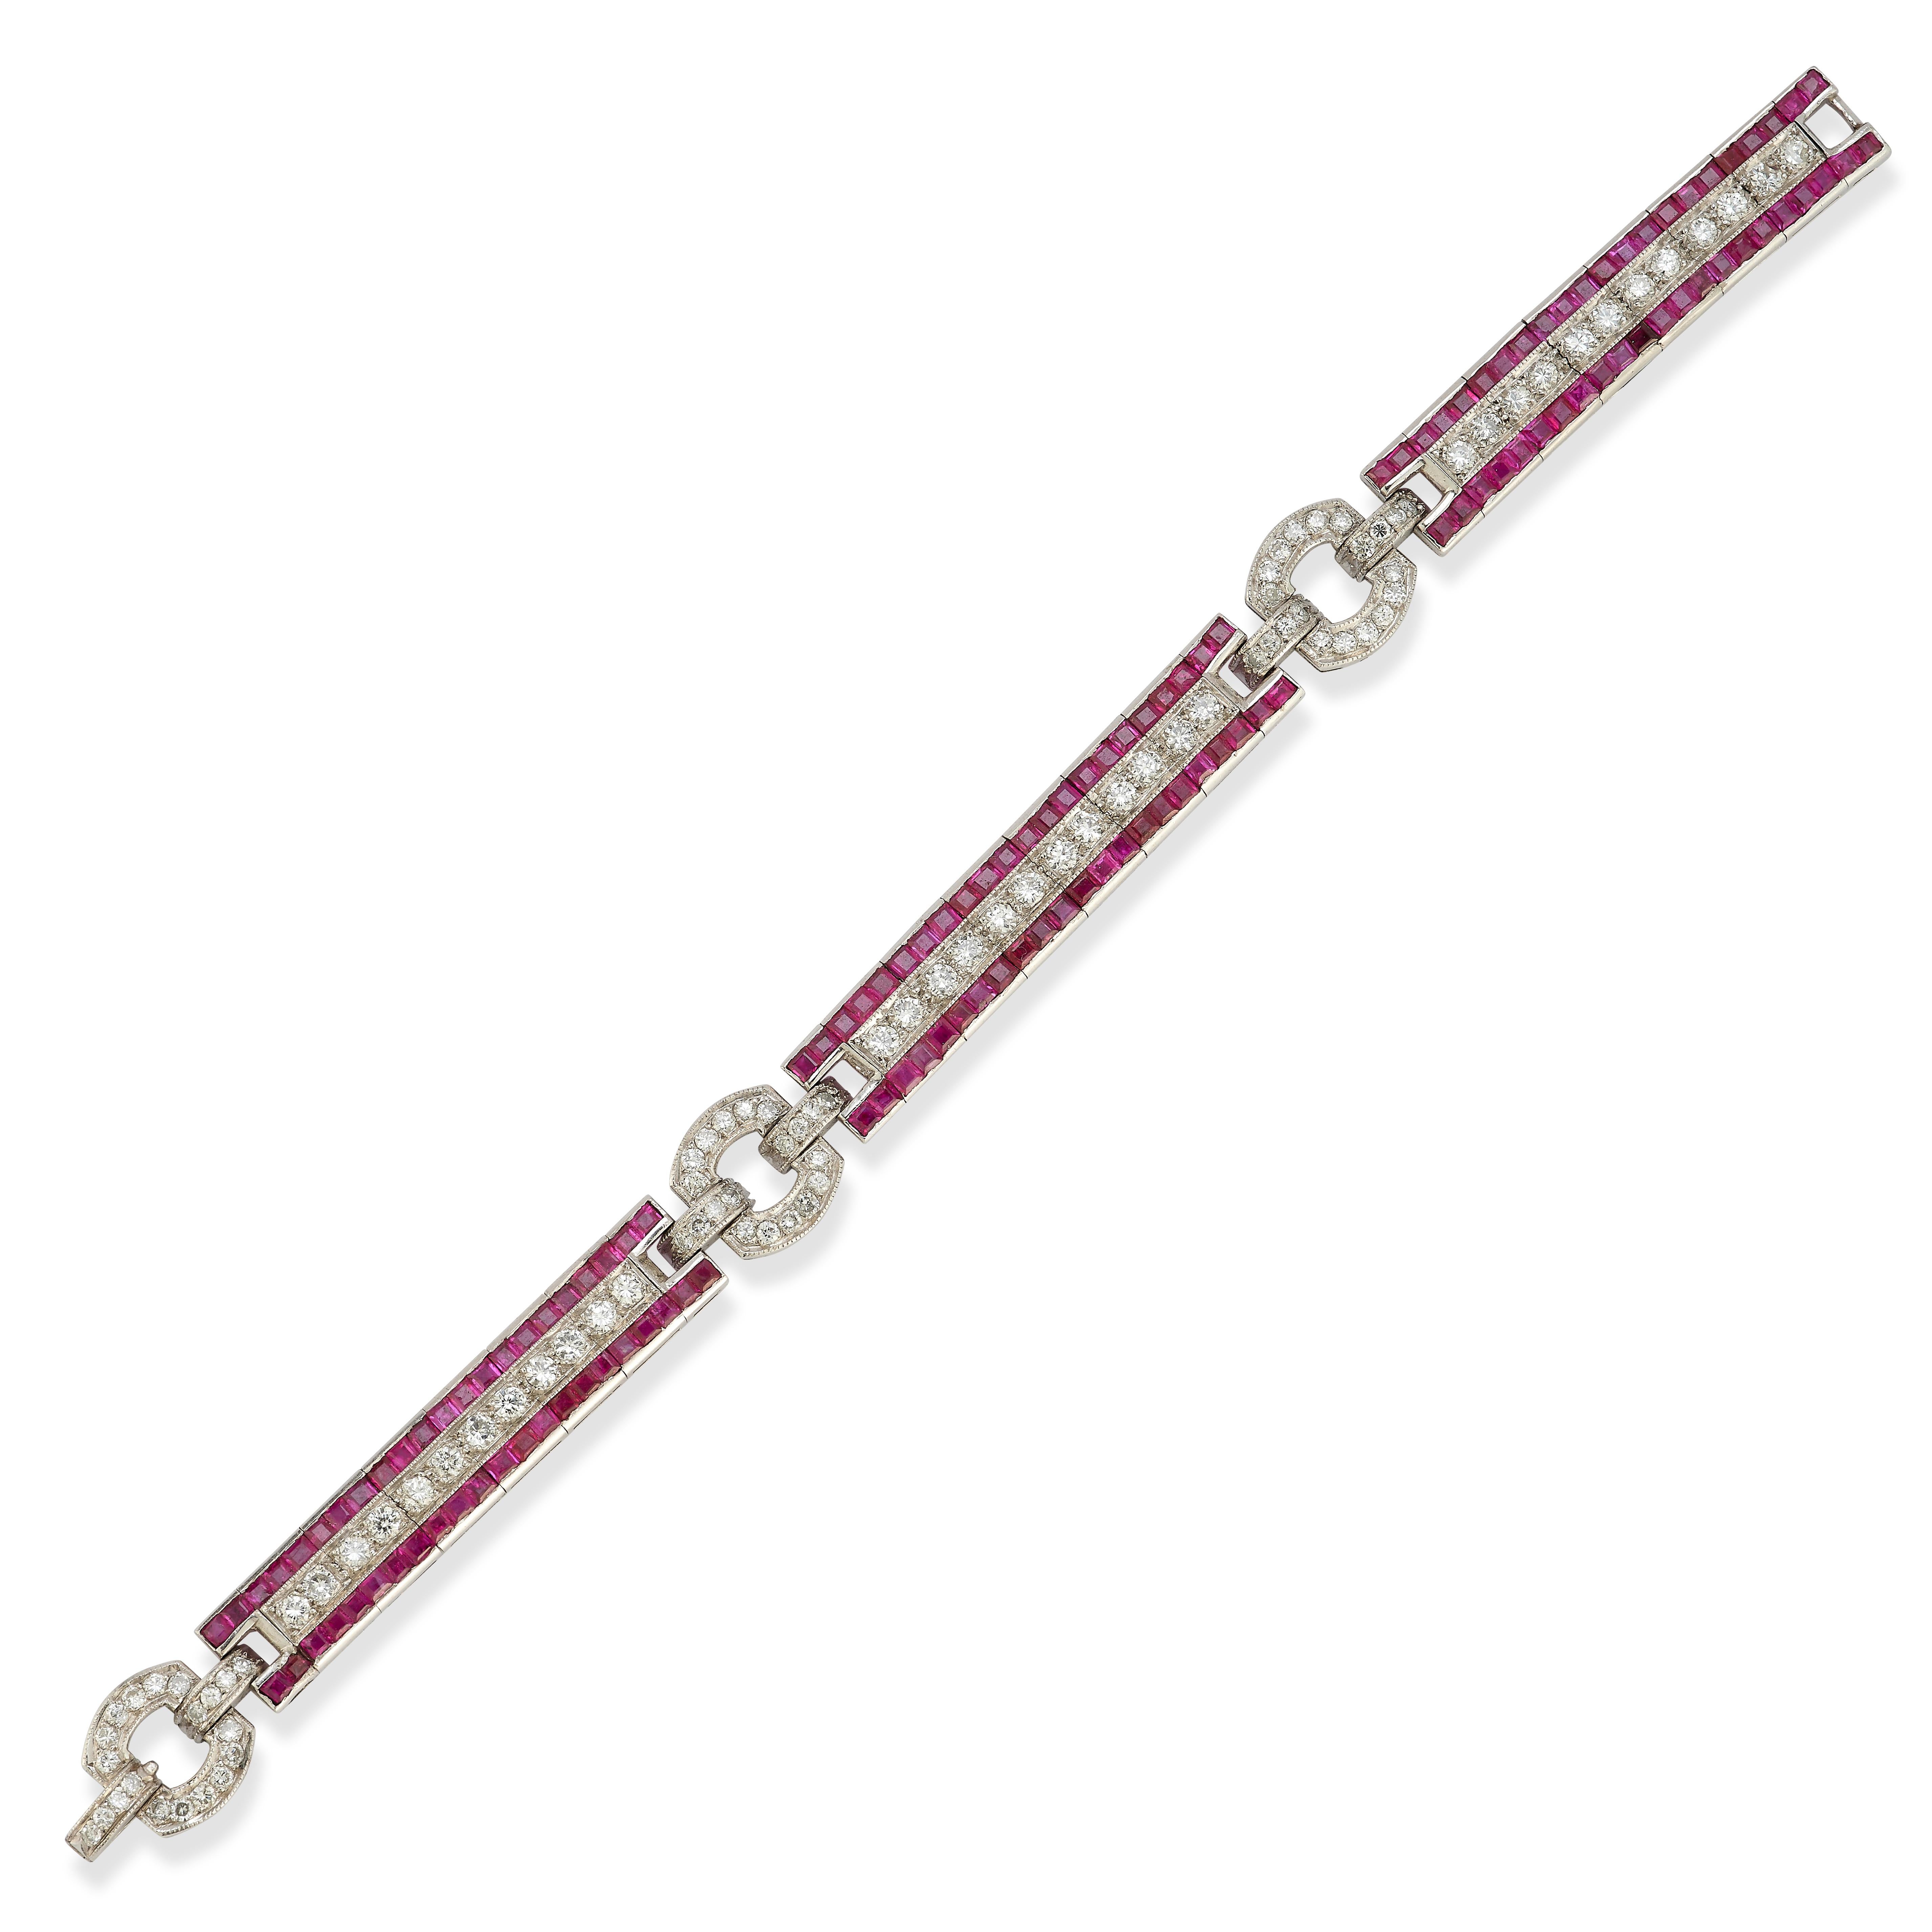 Ruby & Diamond Bracelet, with 132 square cut rubies & 96 round cut diamonds set in platinum.

Ruby Weight: approximately 7.50 carats
Diamond Weight: approximately 5.03 carats

Measurements: 7.5